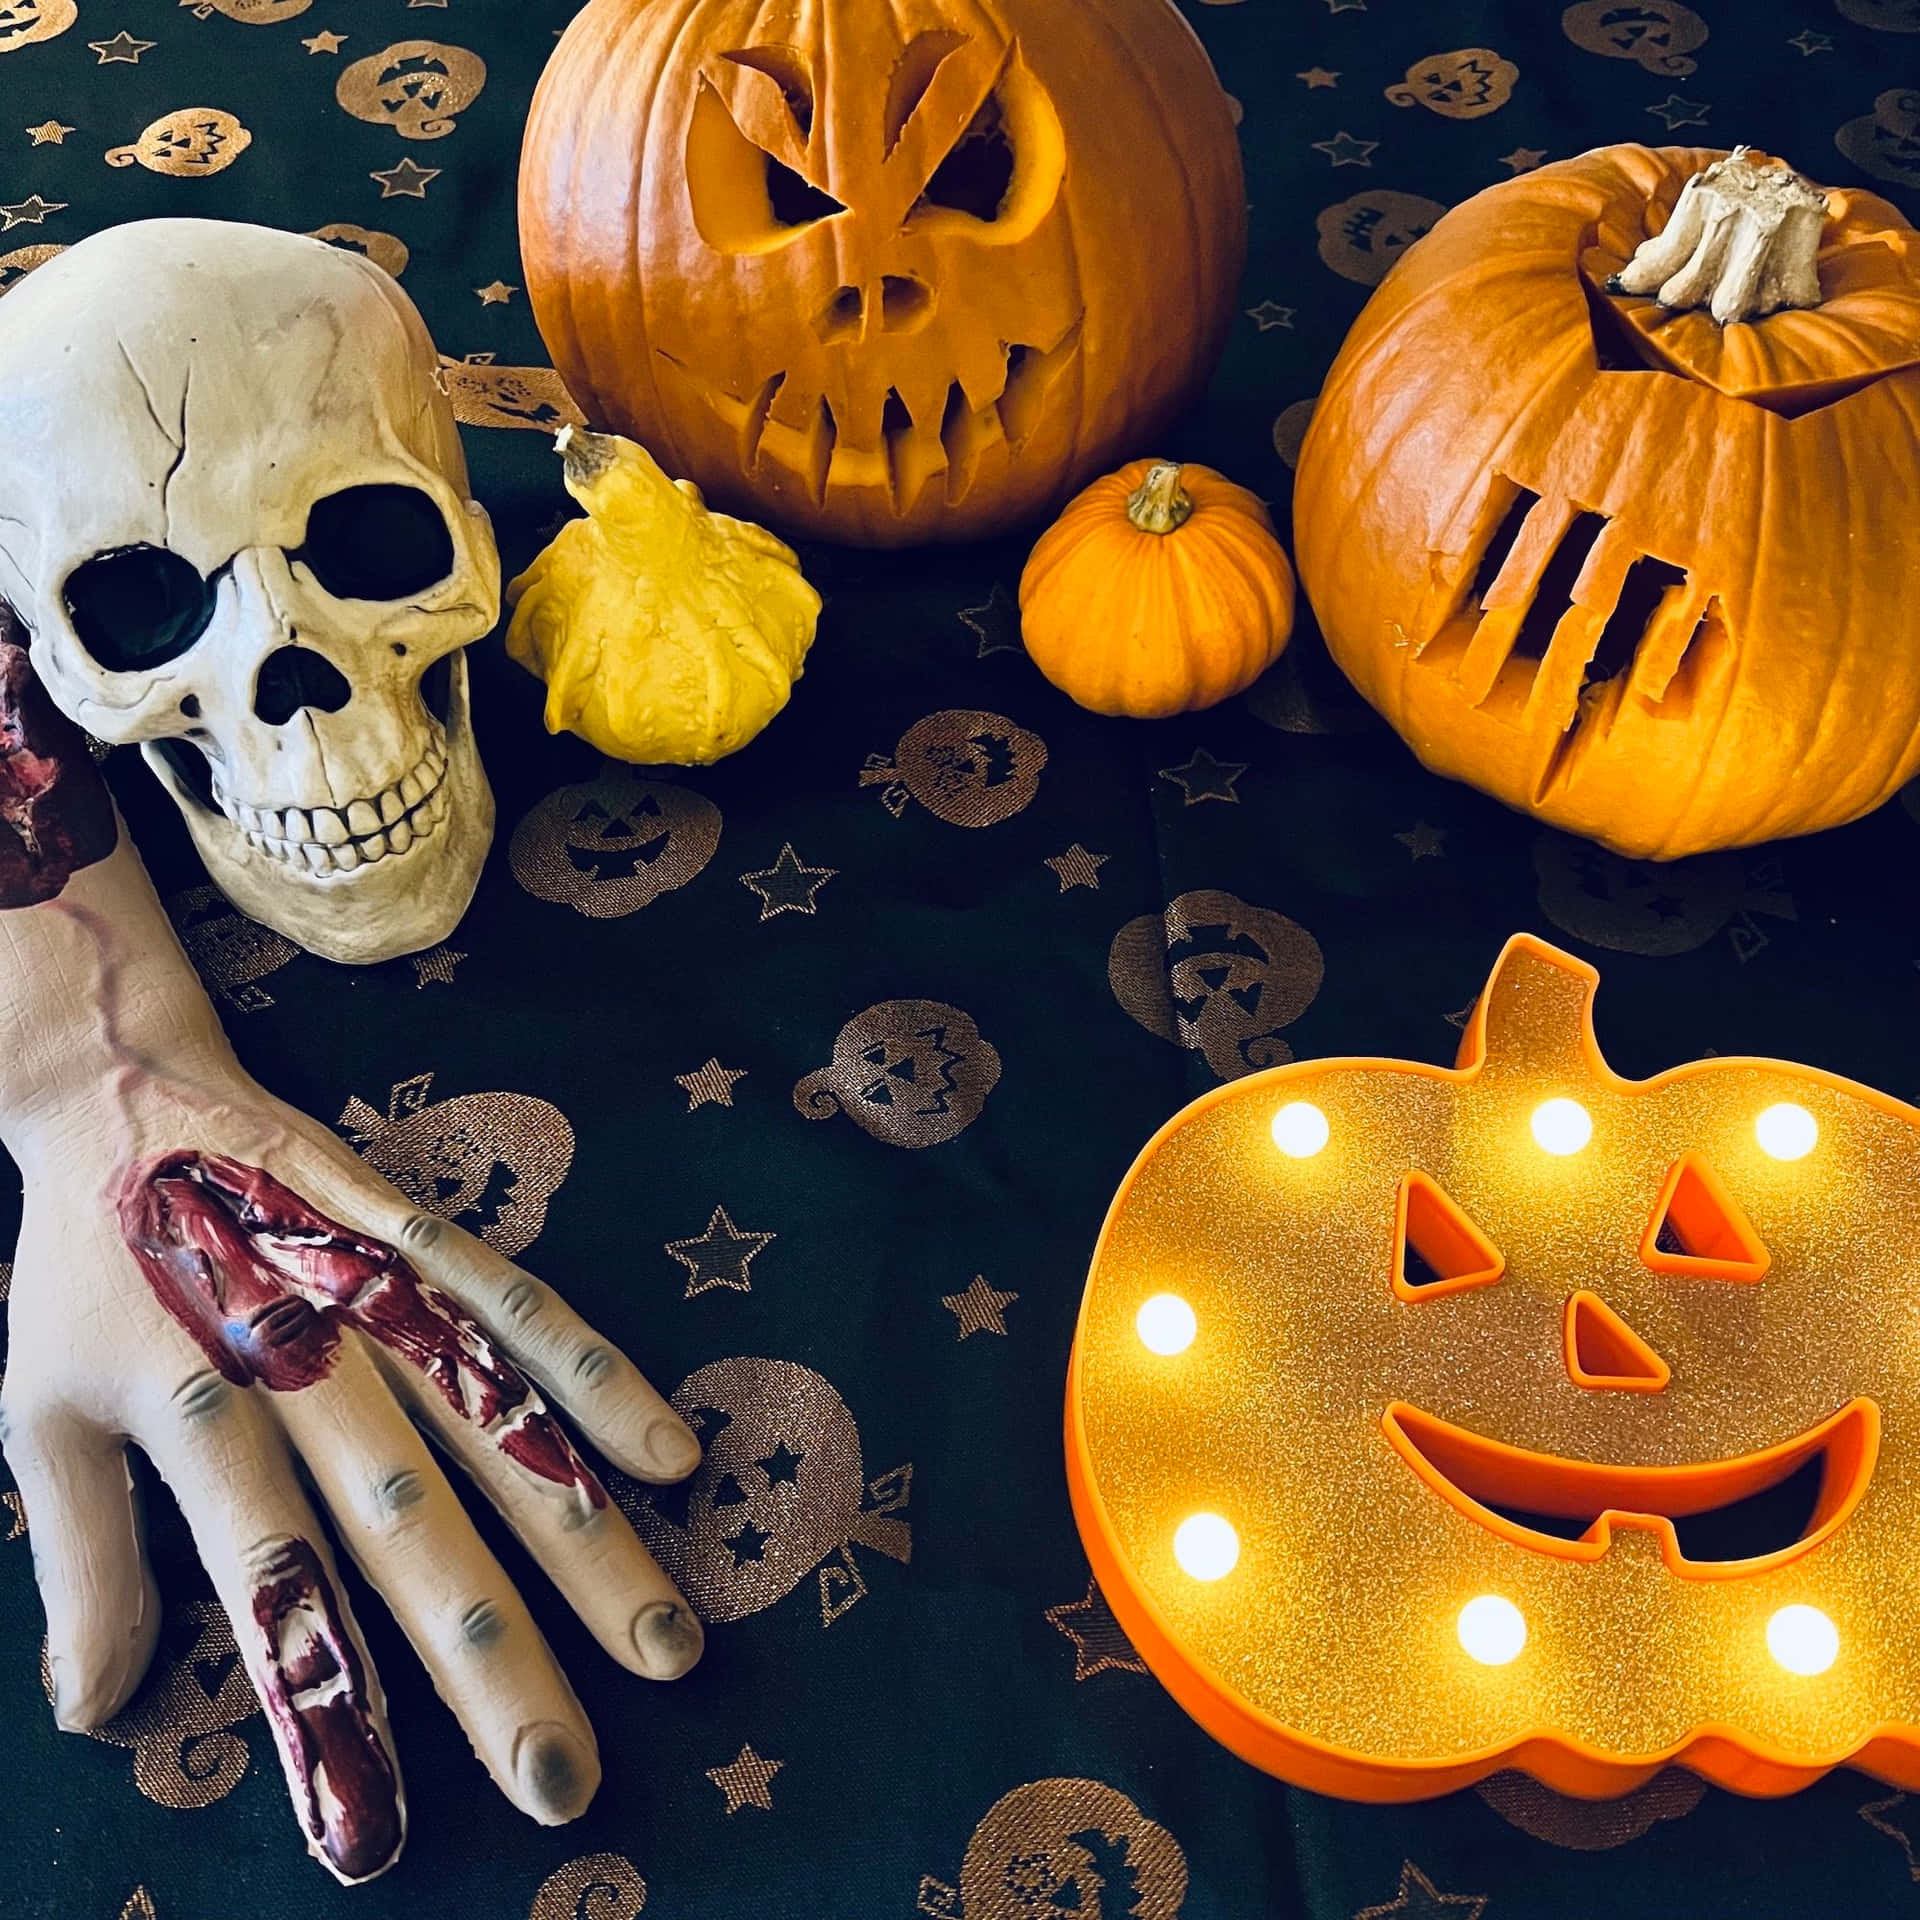 Halloween Pumpkin Carving With Skull And Hand Pictures 2000 x 2000 Picture